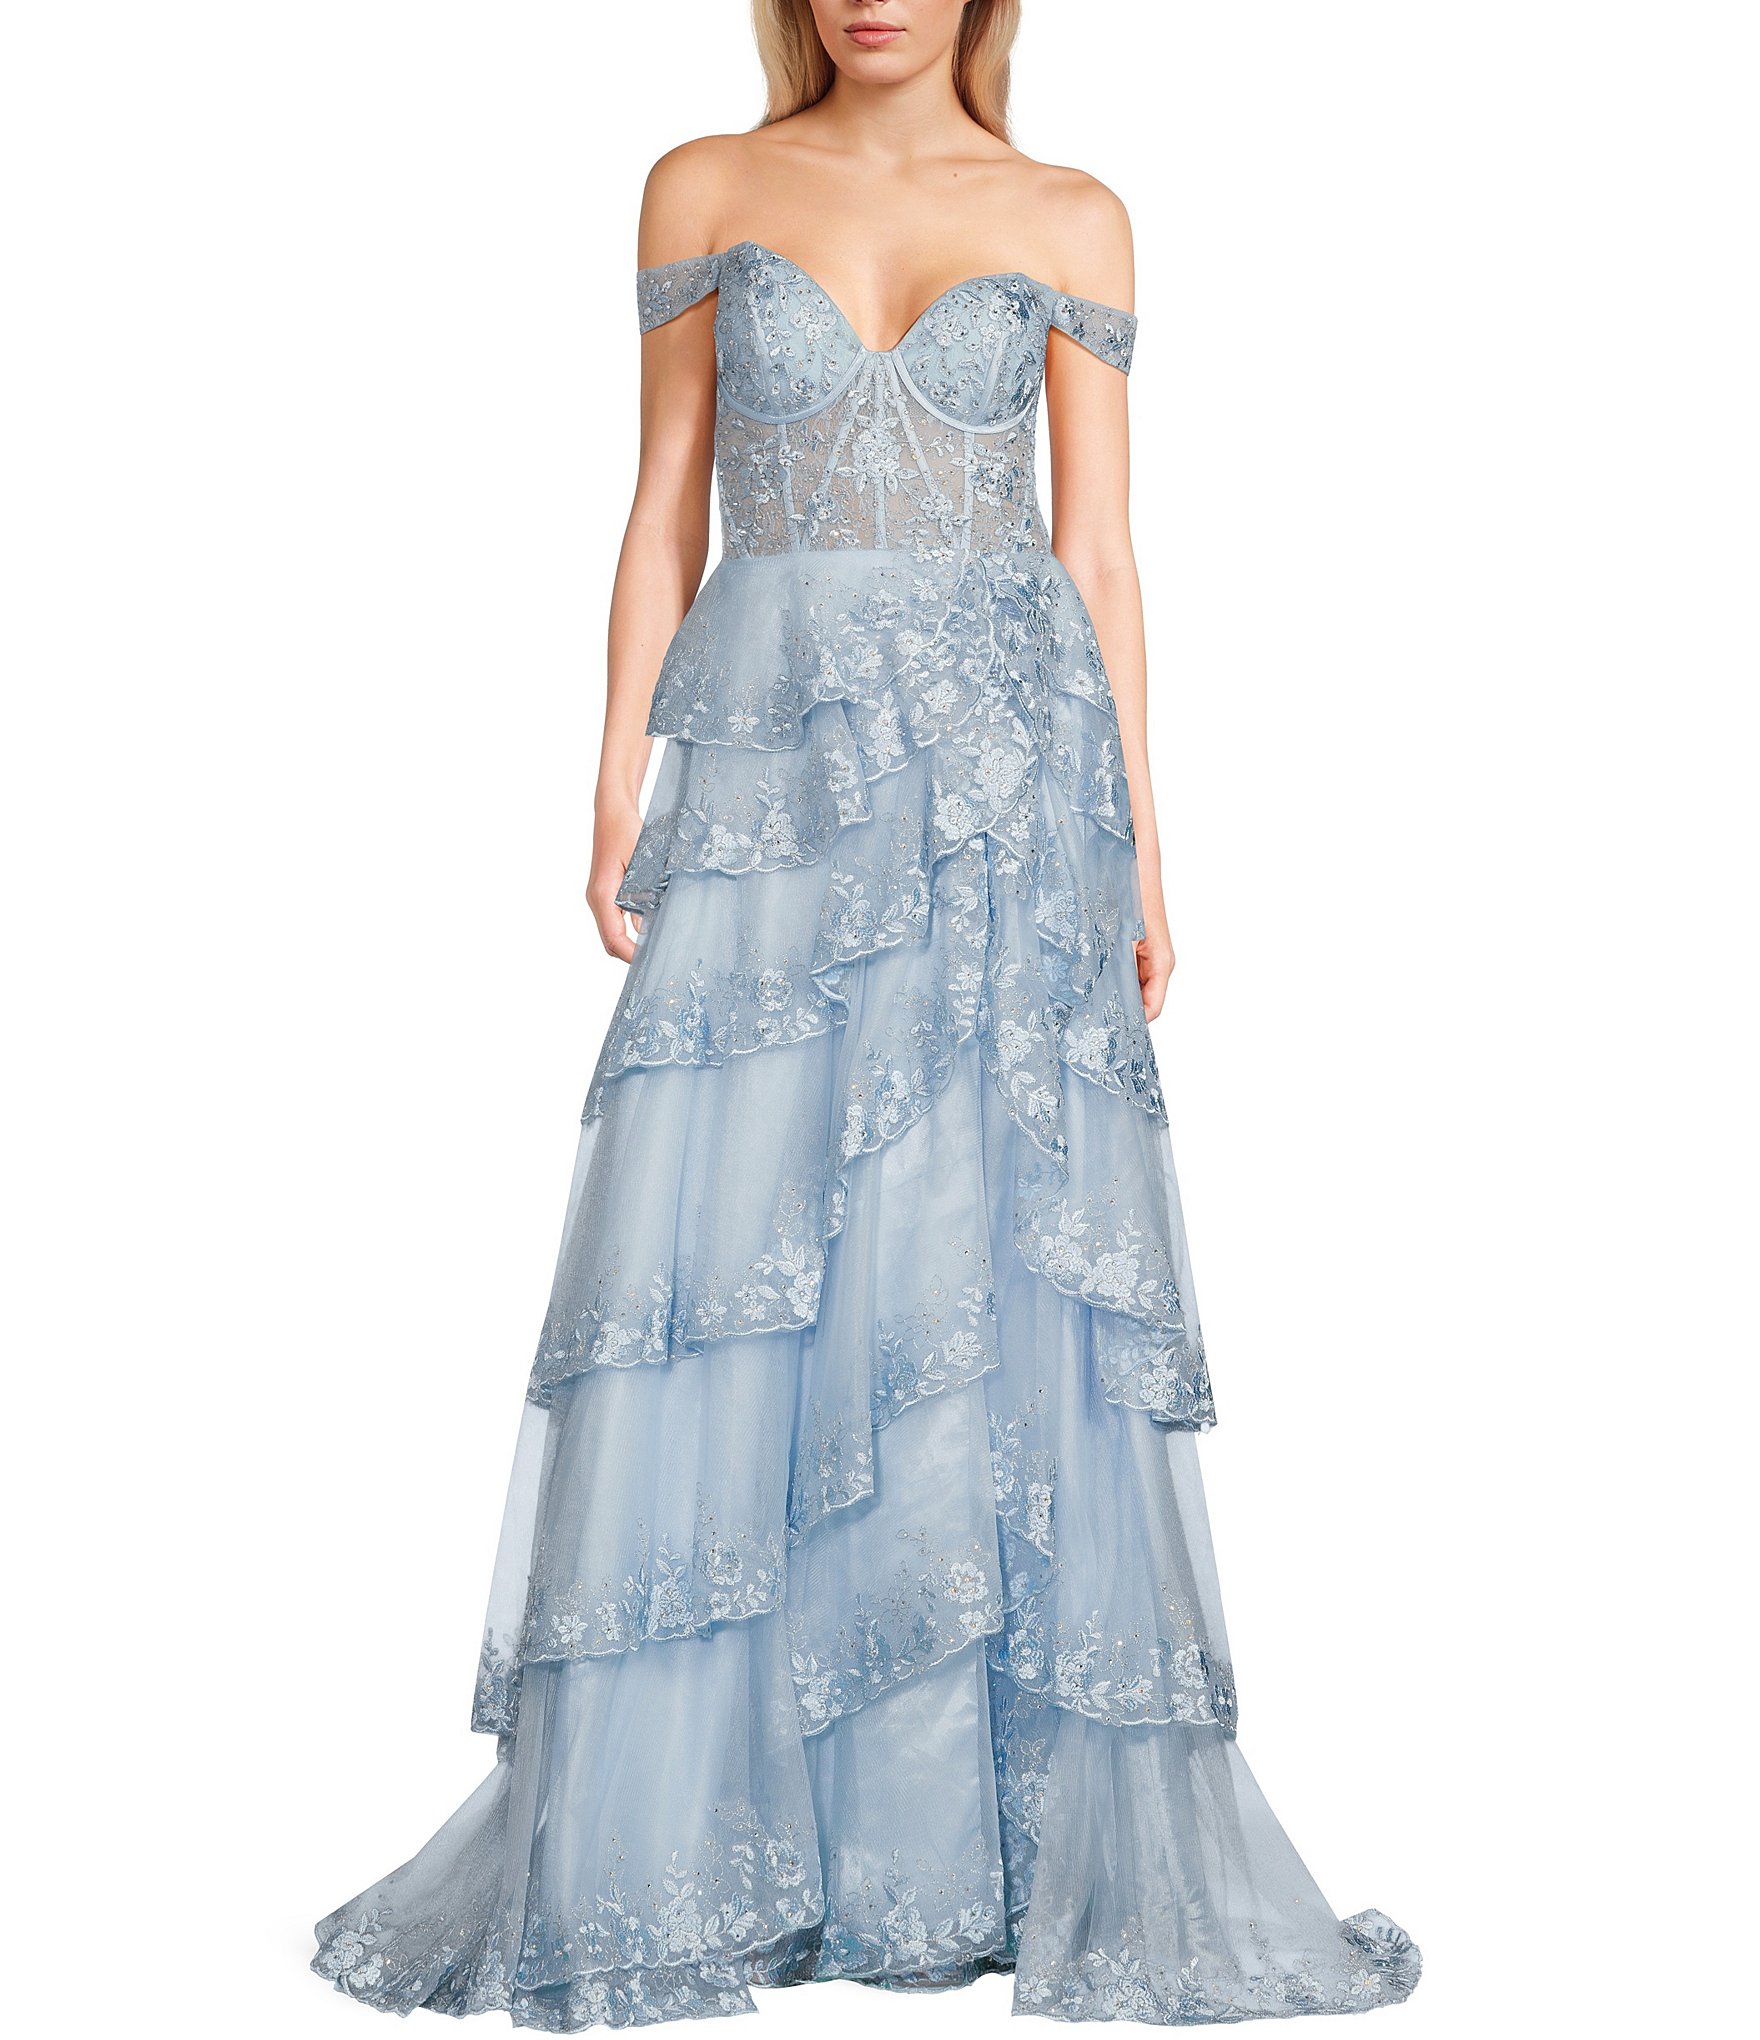 Terani Couture Asymmetrical Neck Embroidered Ball Gown | Dillard's